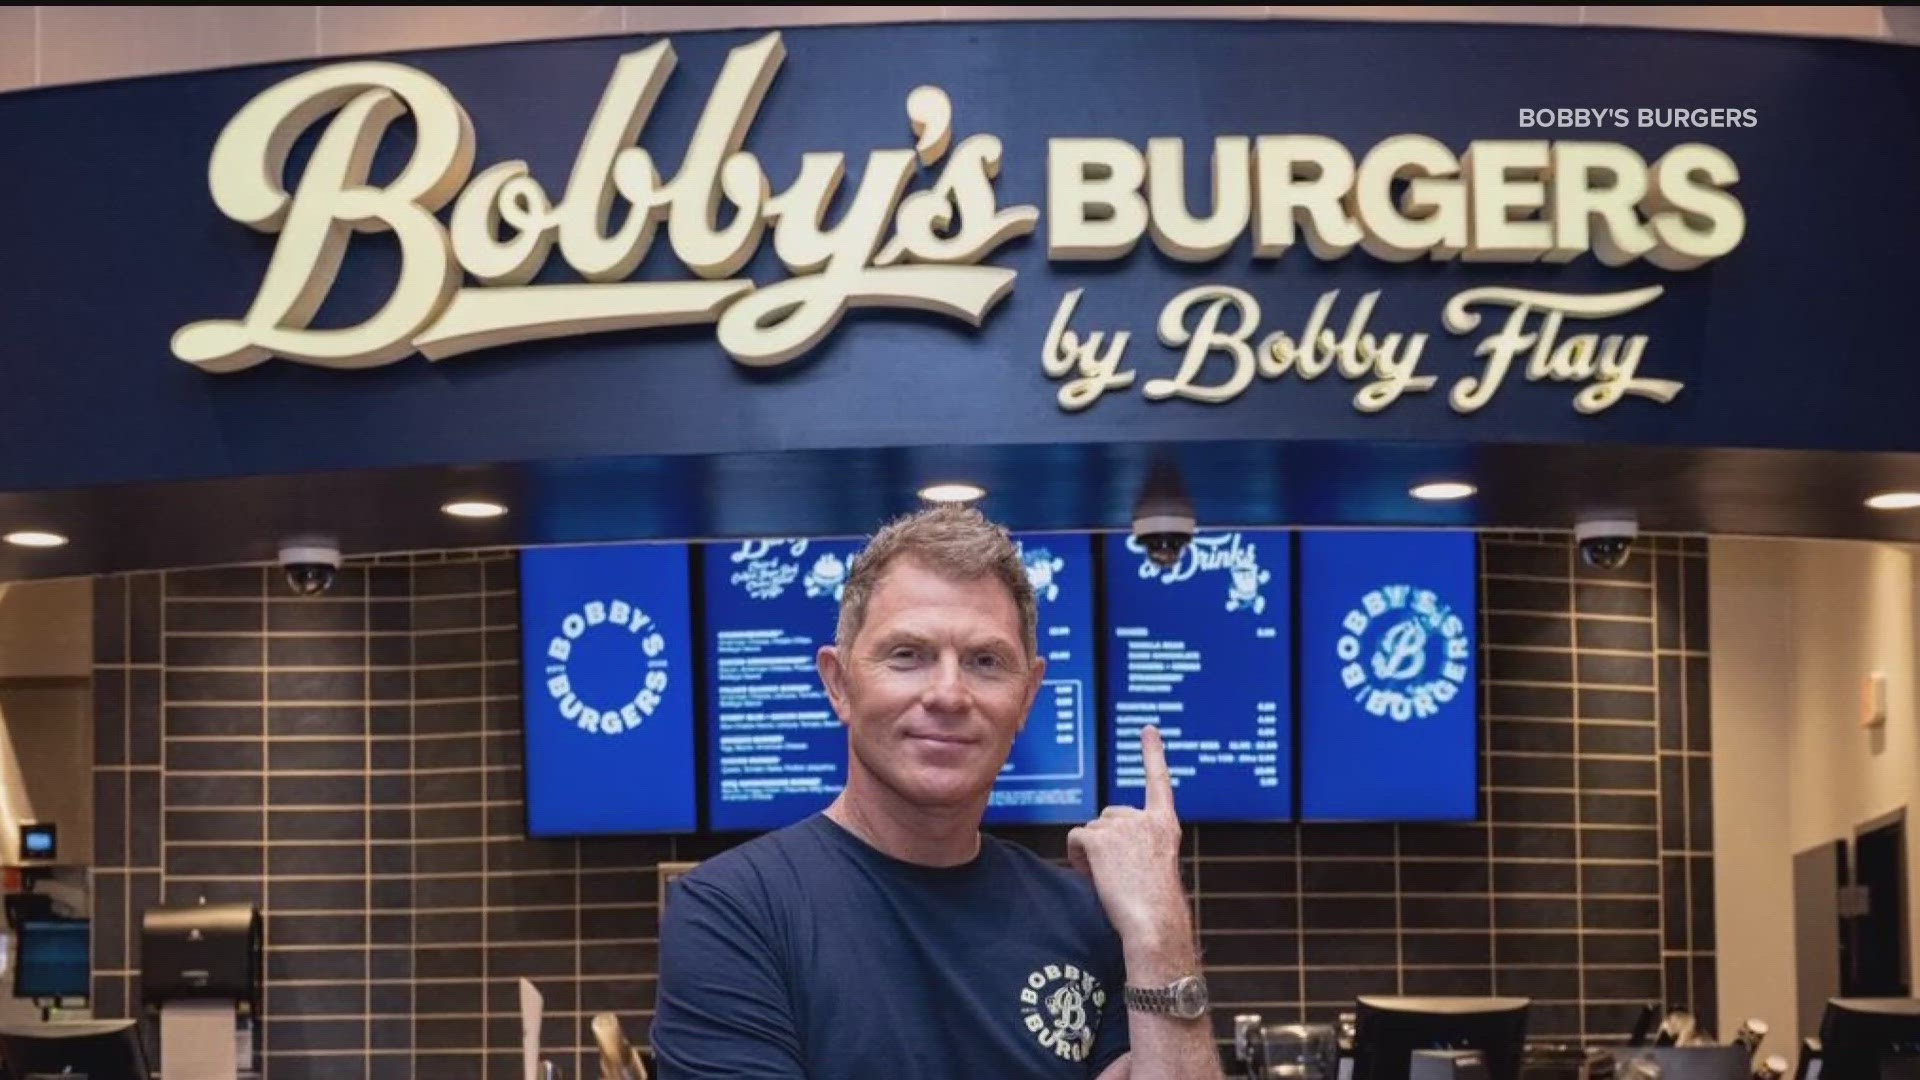 Bobby’s Burgers by Bobby Flay is coming to Colorado in a deal that will lead to the development of multiple locations throughout the Denver area.